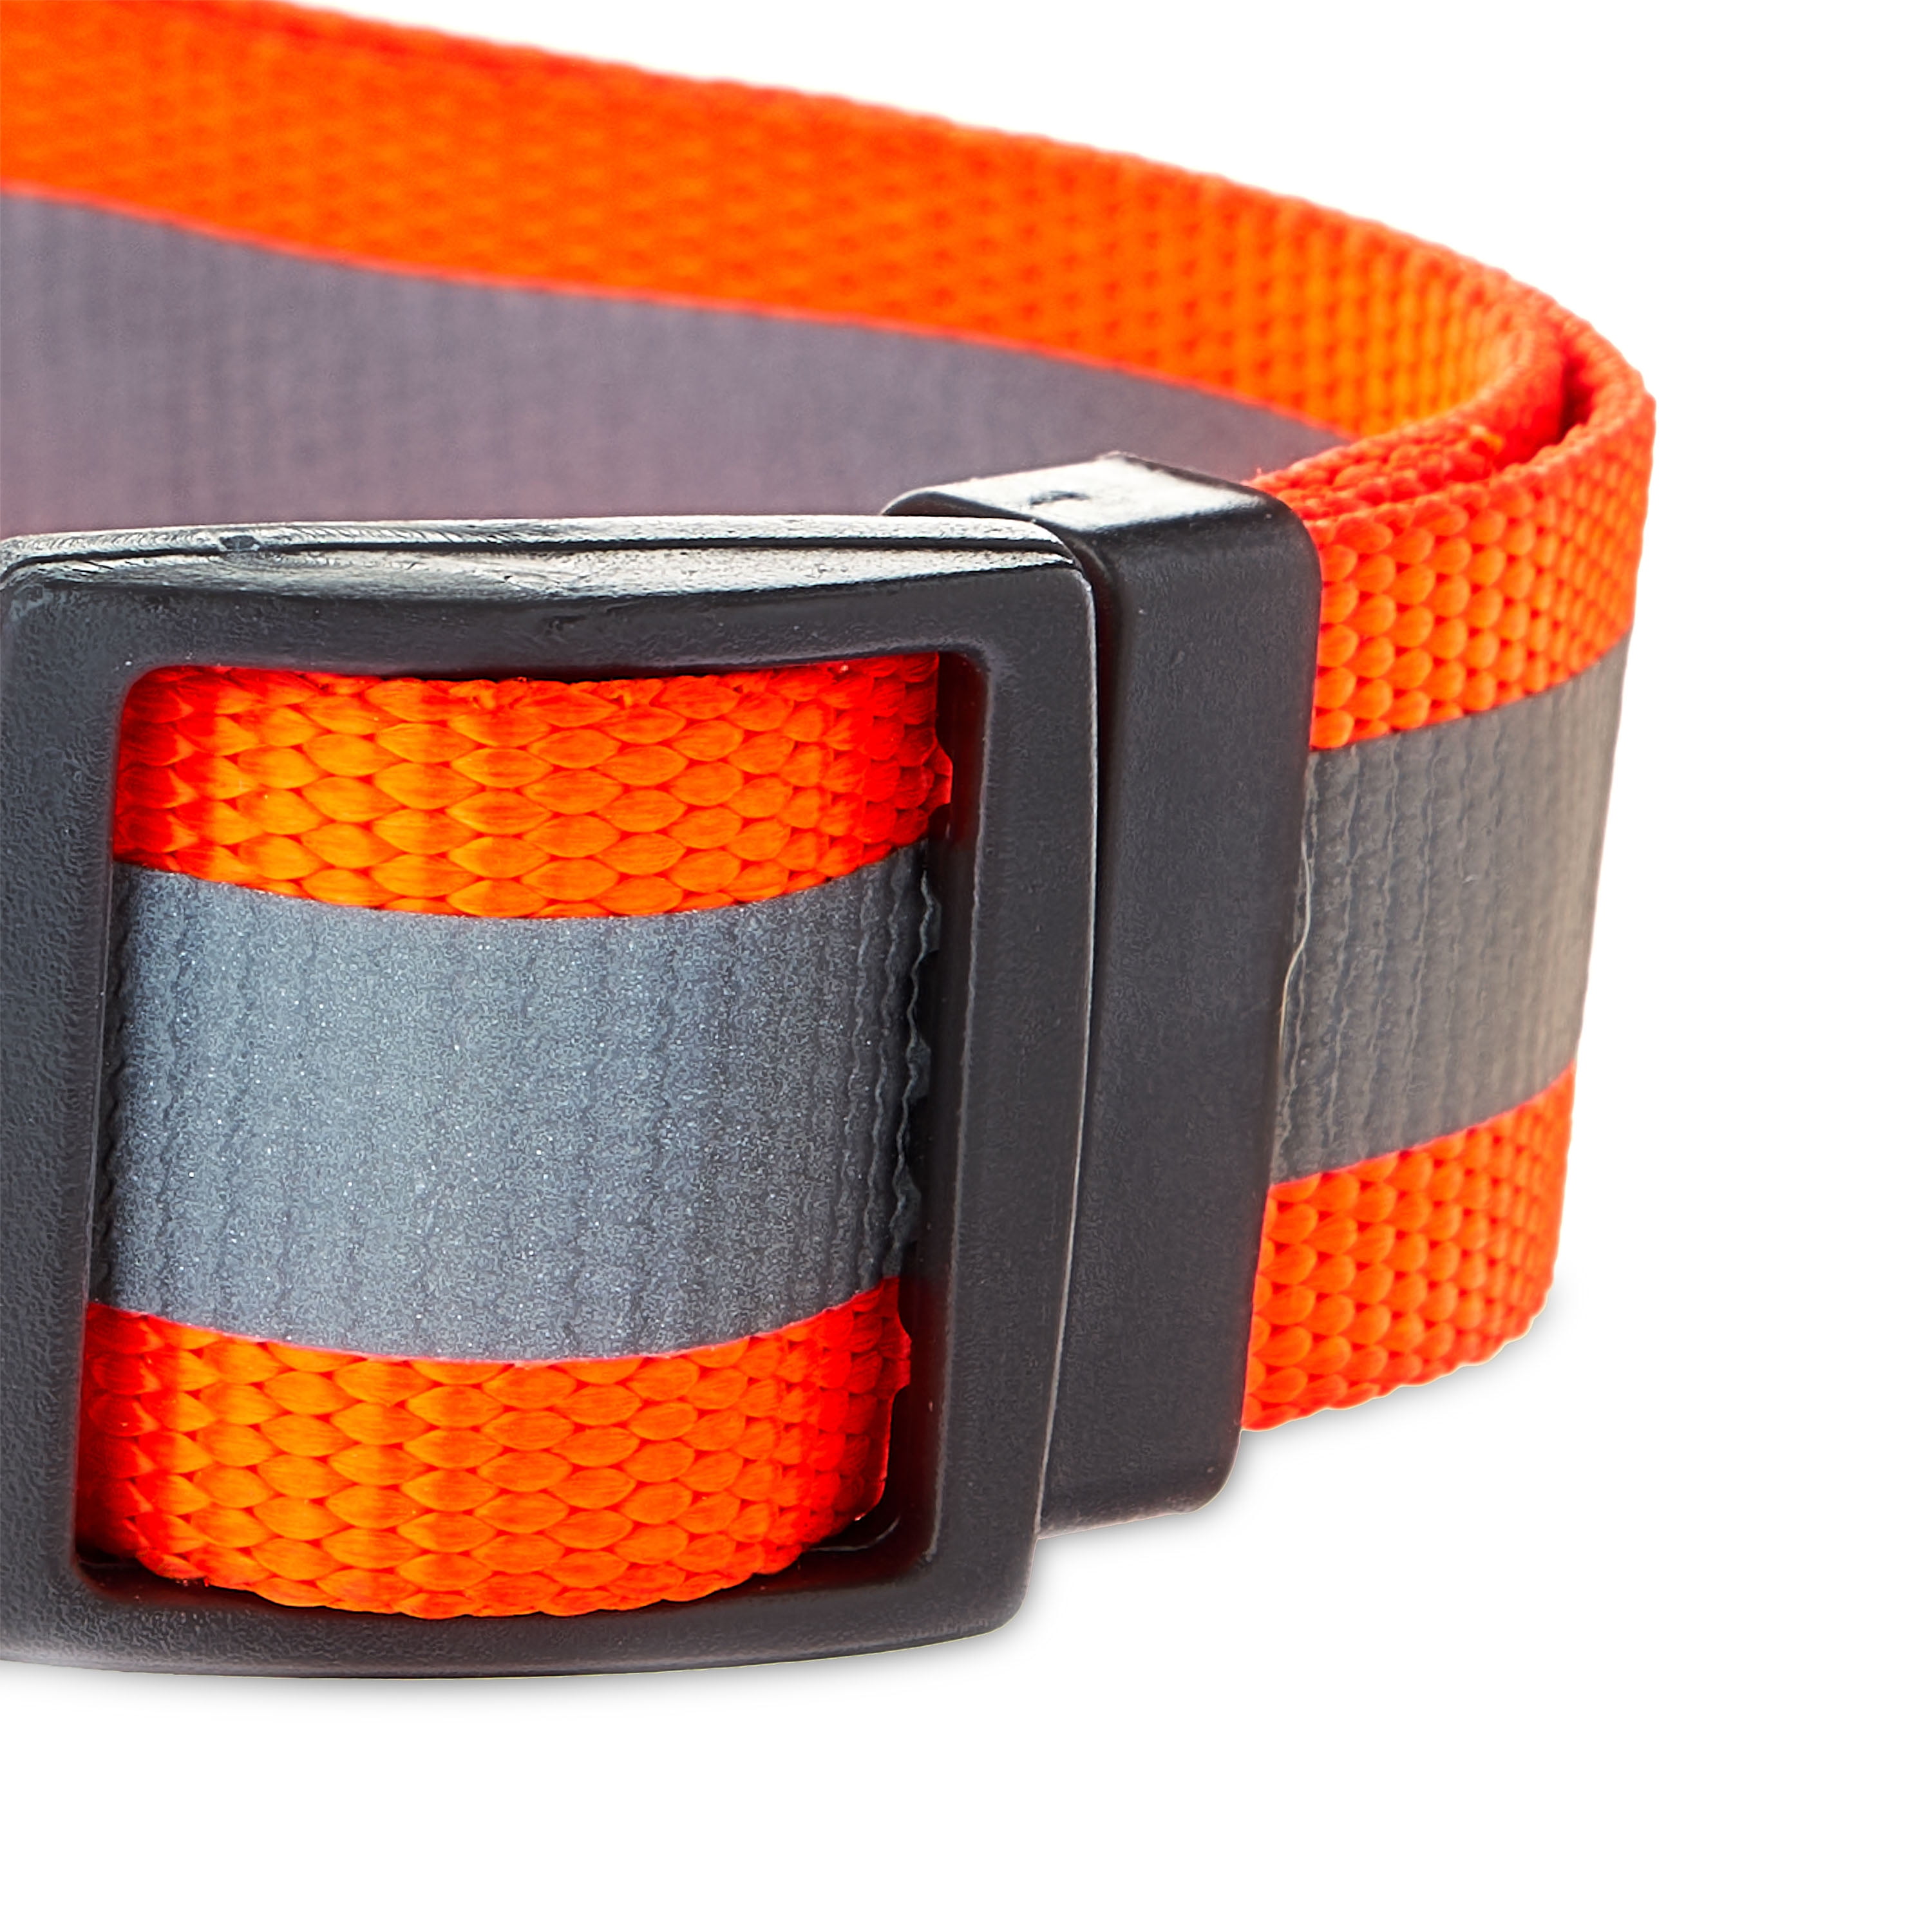 Collar with Roller Buckle And Nickel Hardware Color: Orange